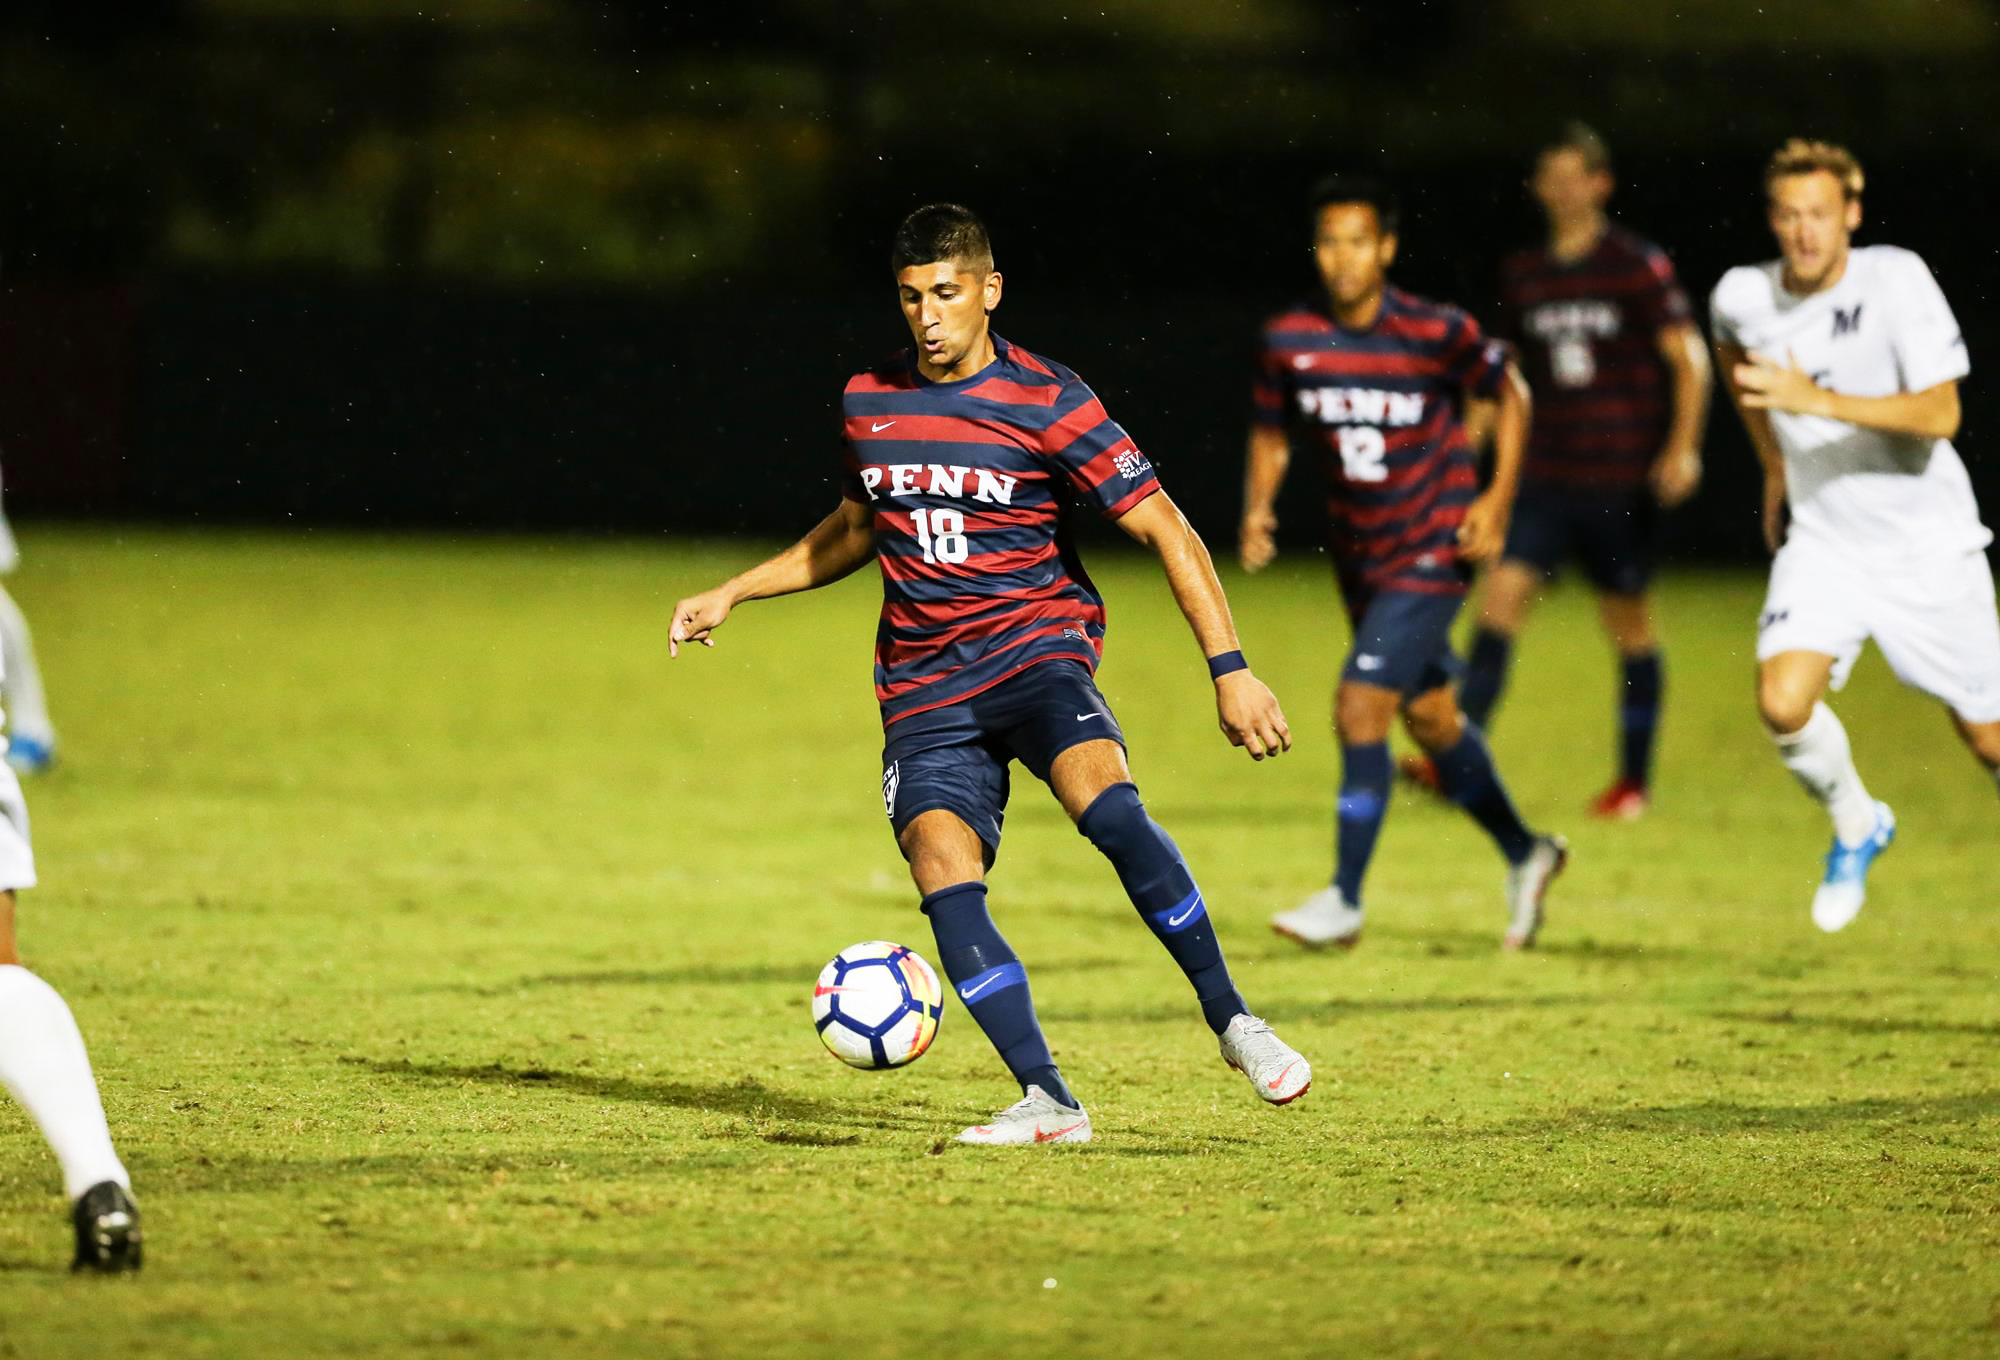 Joey Bhangdia of the men's soccer team prepares to kick the ball.